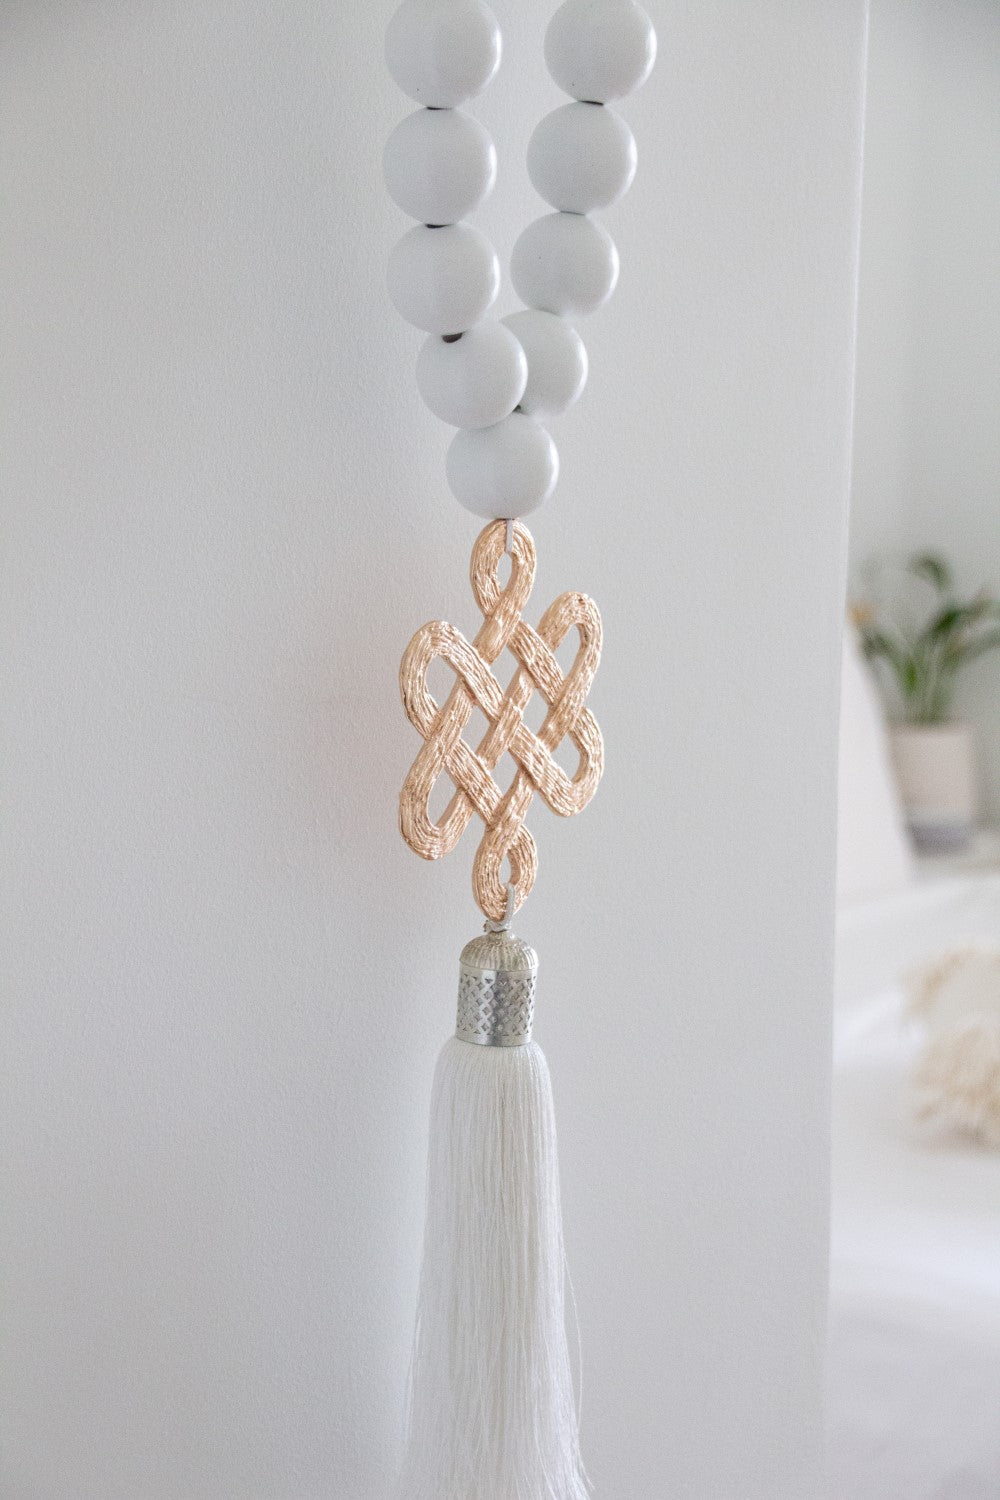 White wood Beads Wall Décor with Endless Love Metal Charm and Silk Tassel - Stylish Luck Home Decor | Hamsa \ Hand Of Fatima | Good Luck Gifts